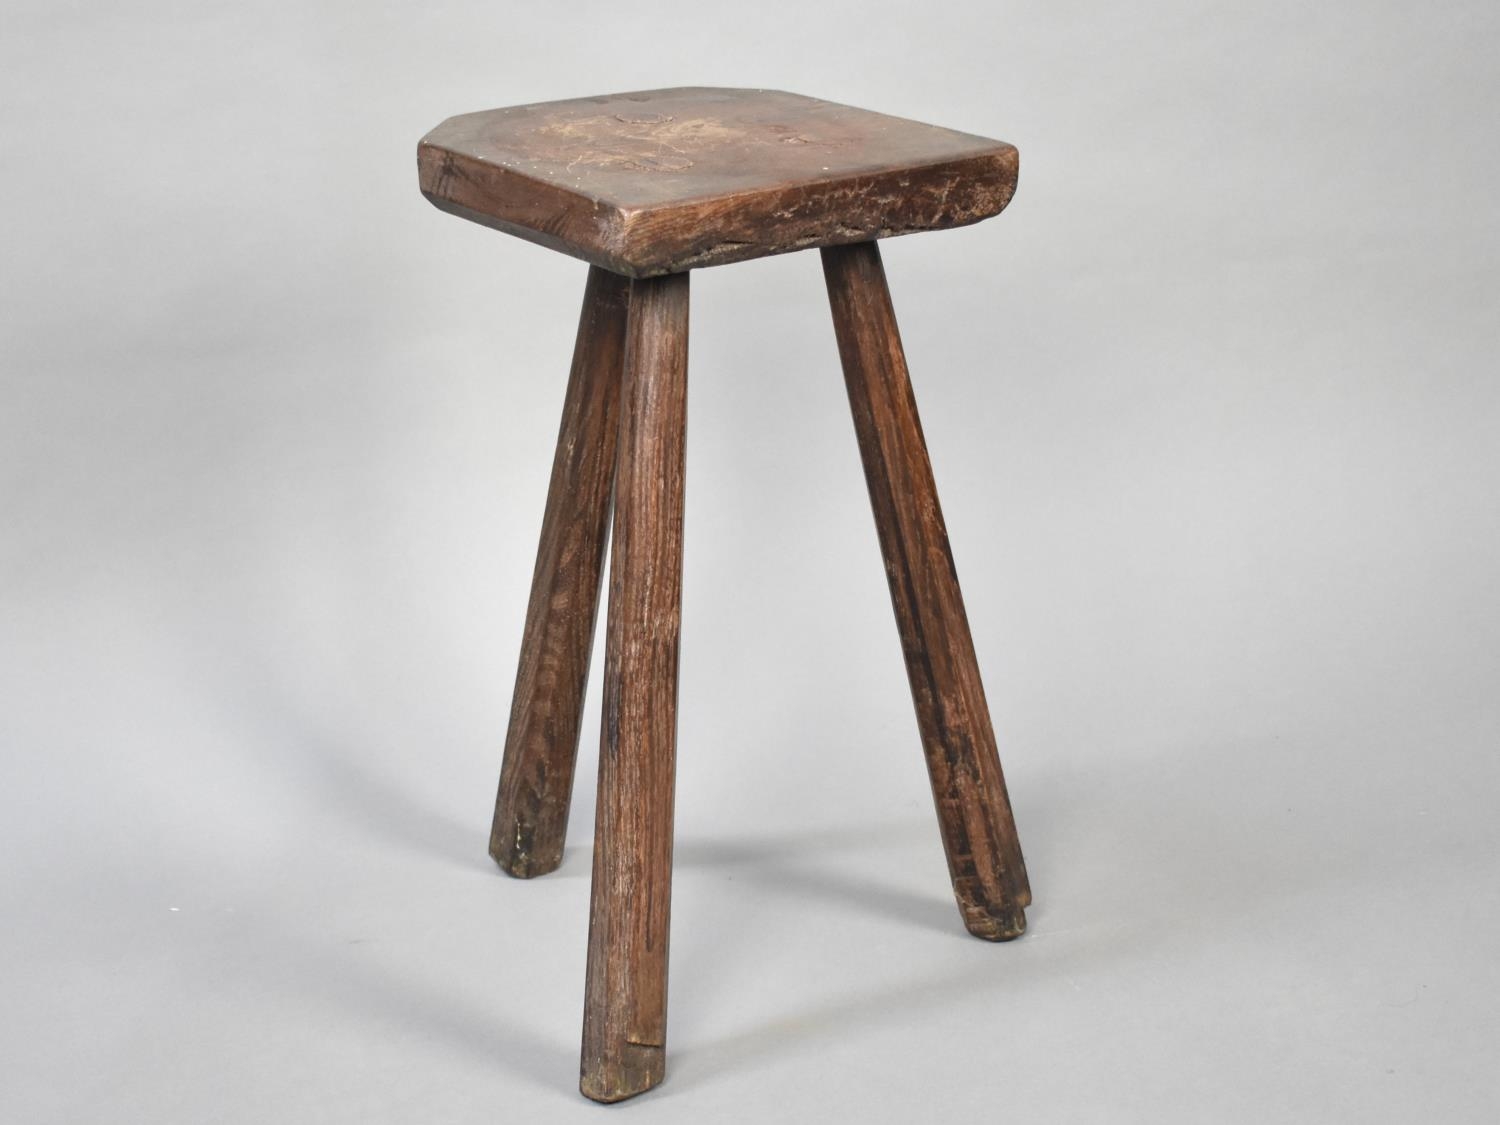 A Vintage Rustic Three Legged Stool with Rectangular Top, 43cms High